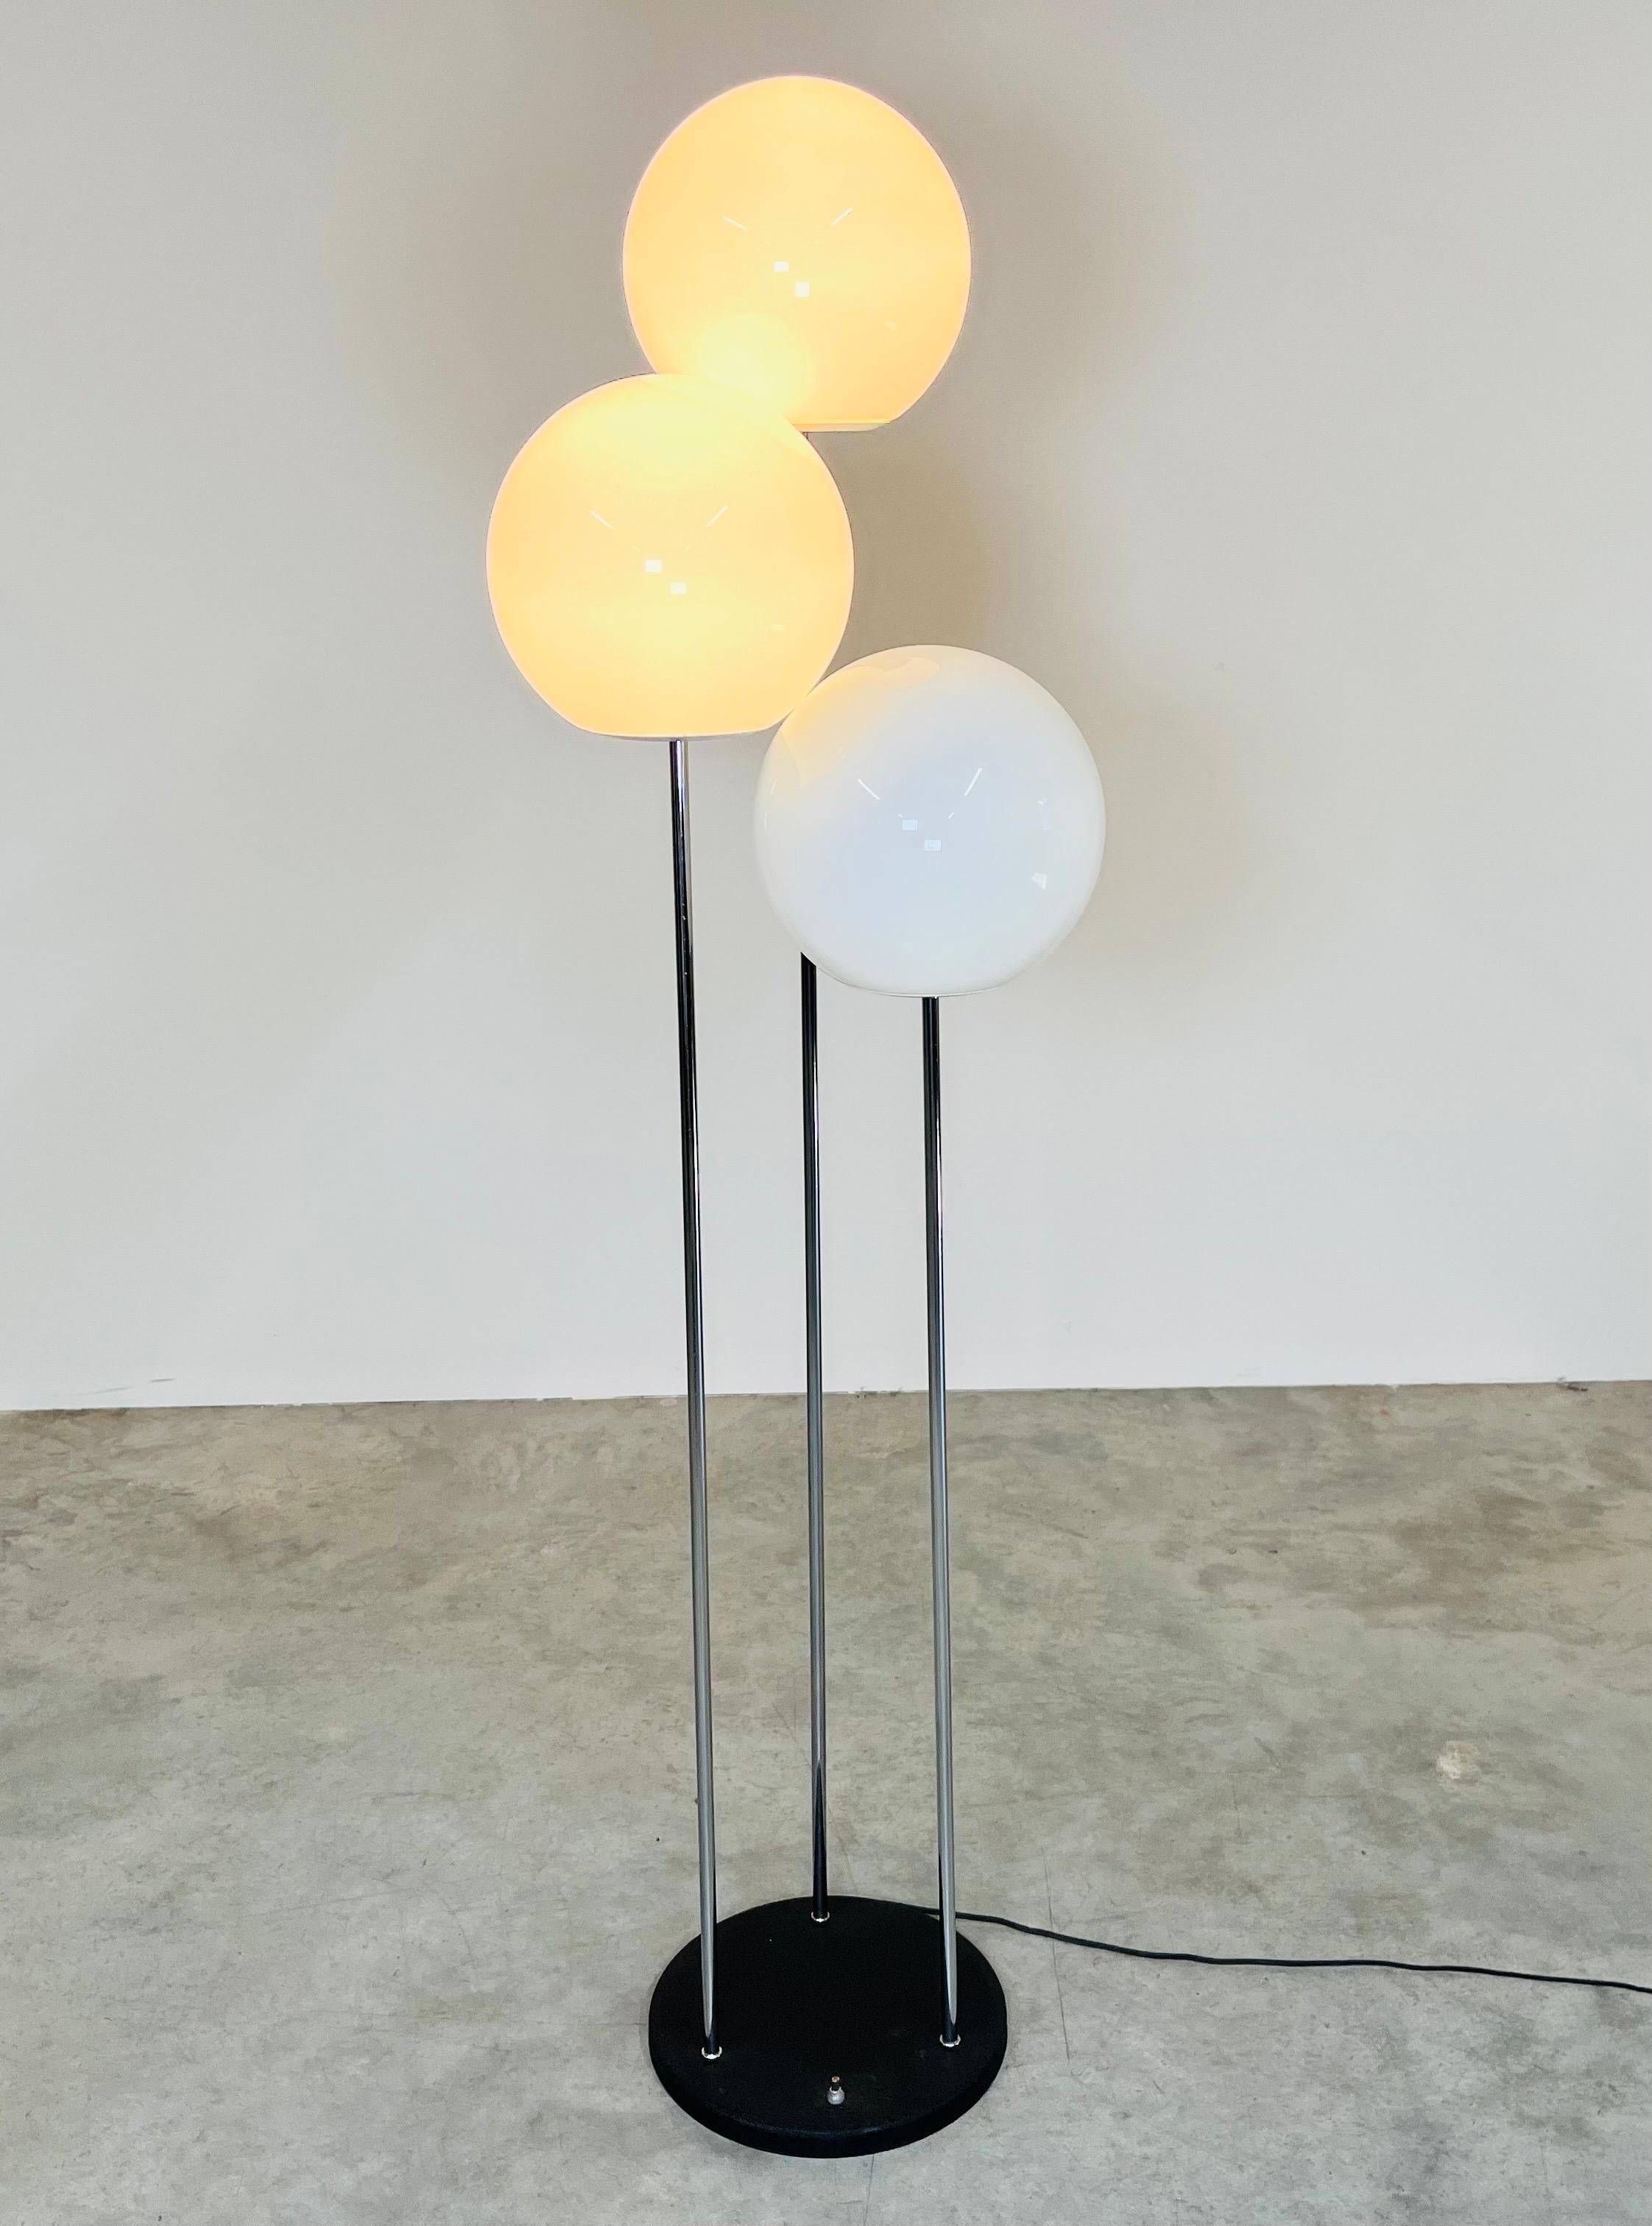 A beautiful triple stem “Lollipop” floor lamp designed by Robert Sonneman having chromed steep stems that lead to 3 independent milk glass globes all standing over a black textured steel base having a 3-way foot switch that triggers a single, double